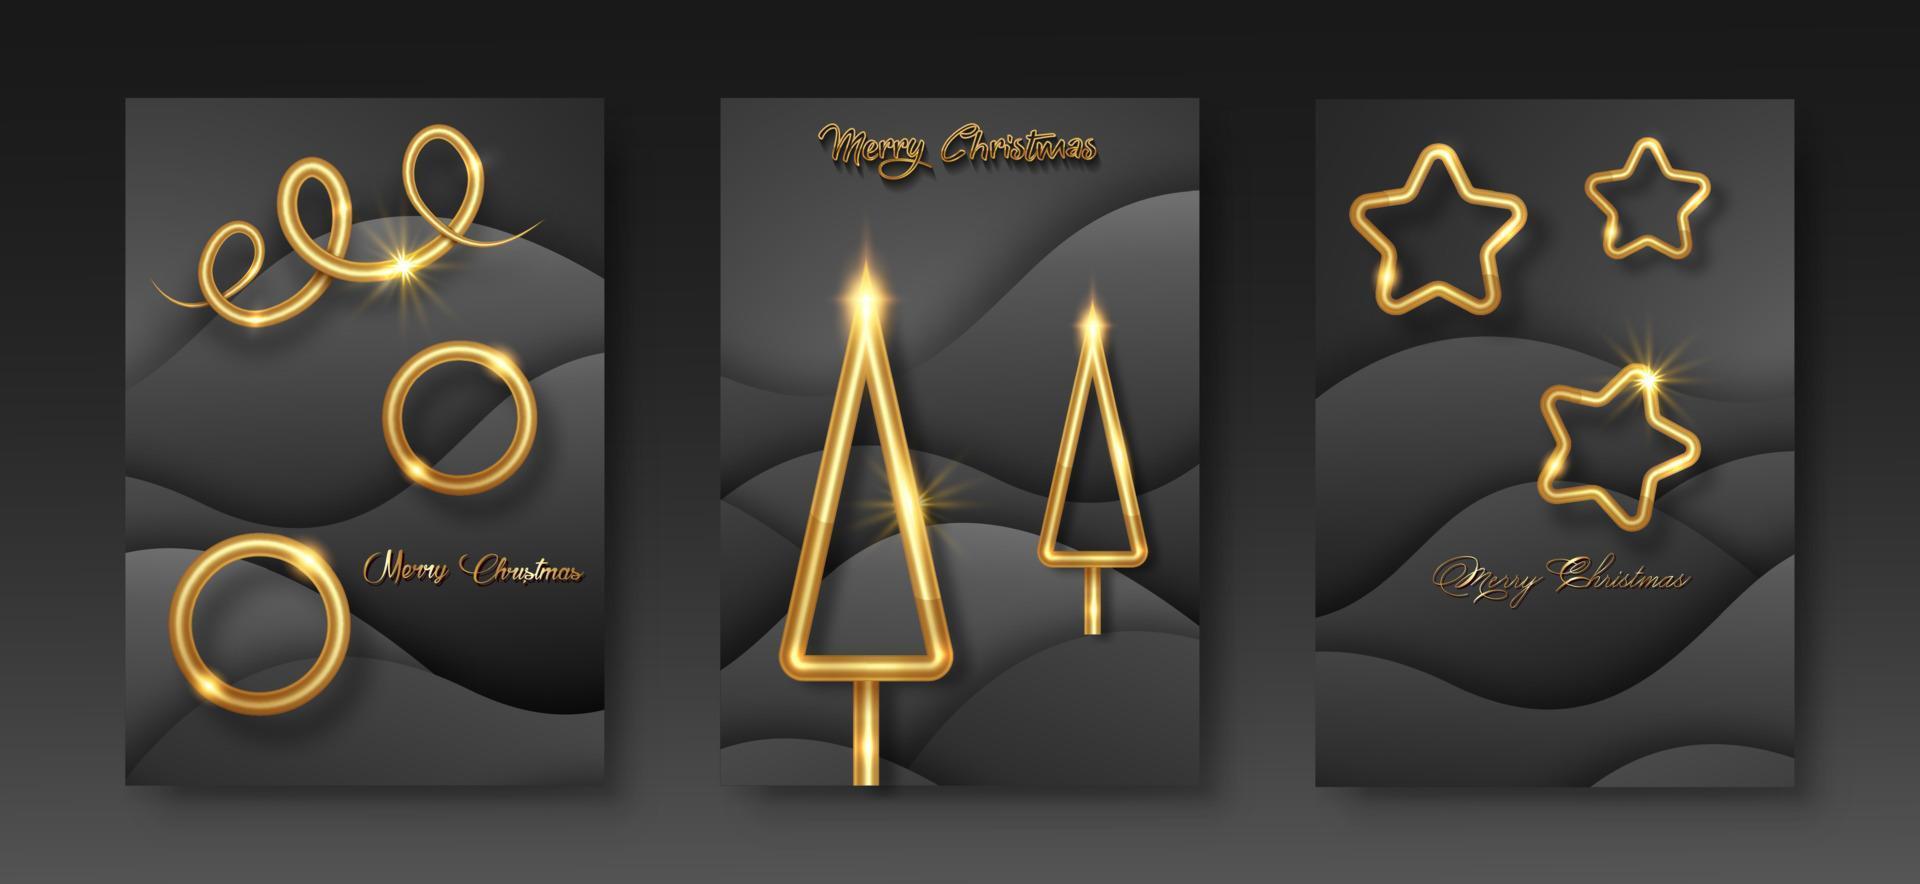 set cards Merry Christmas gold texture, golden luxury elements, black paper cut background for calendar and greetings card or Christmas themed winter holiday invitations with geometric decorations vector